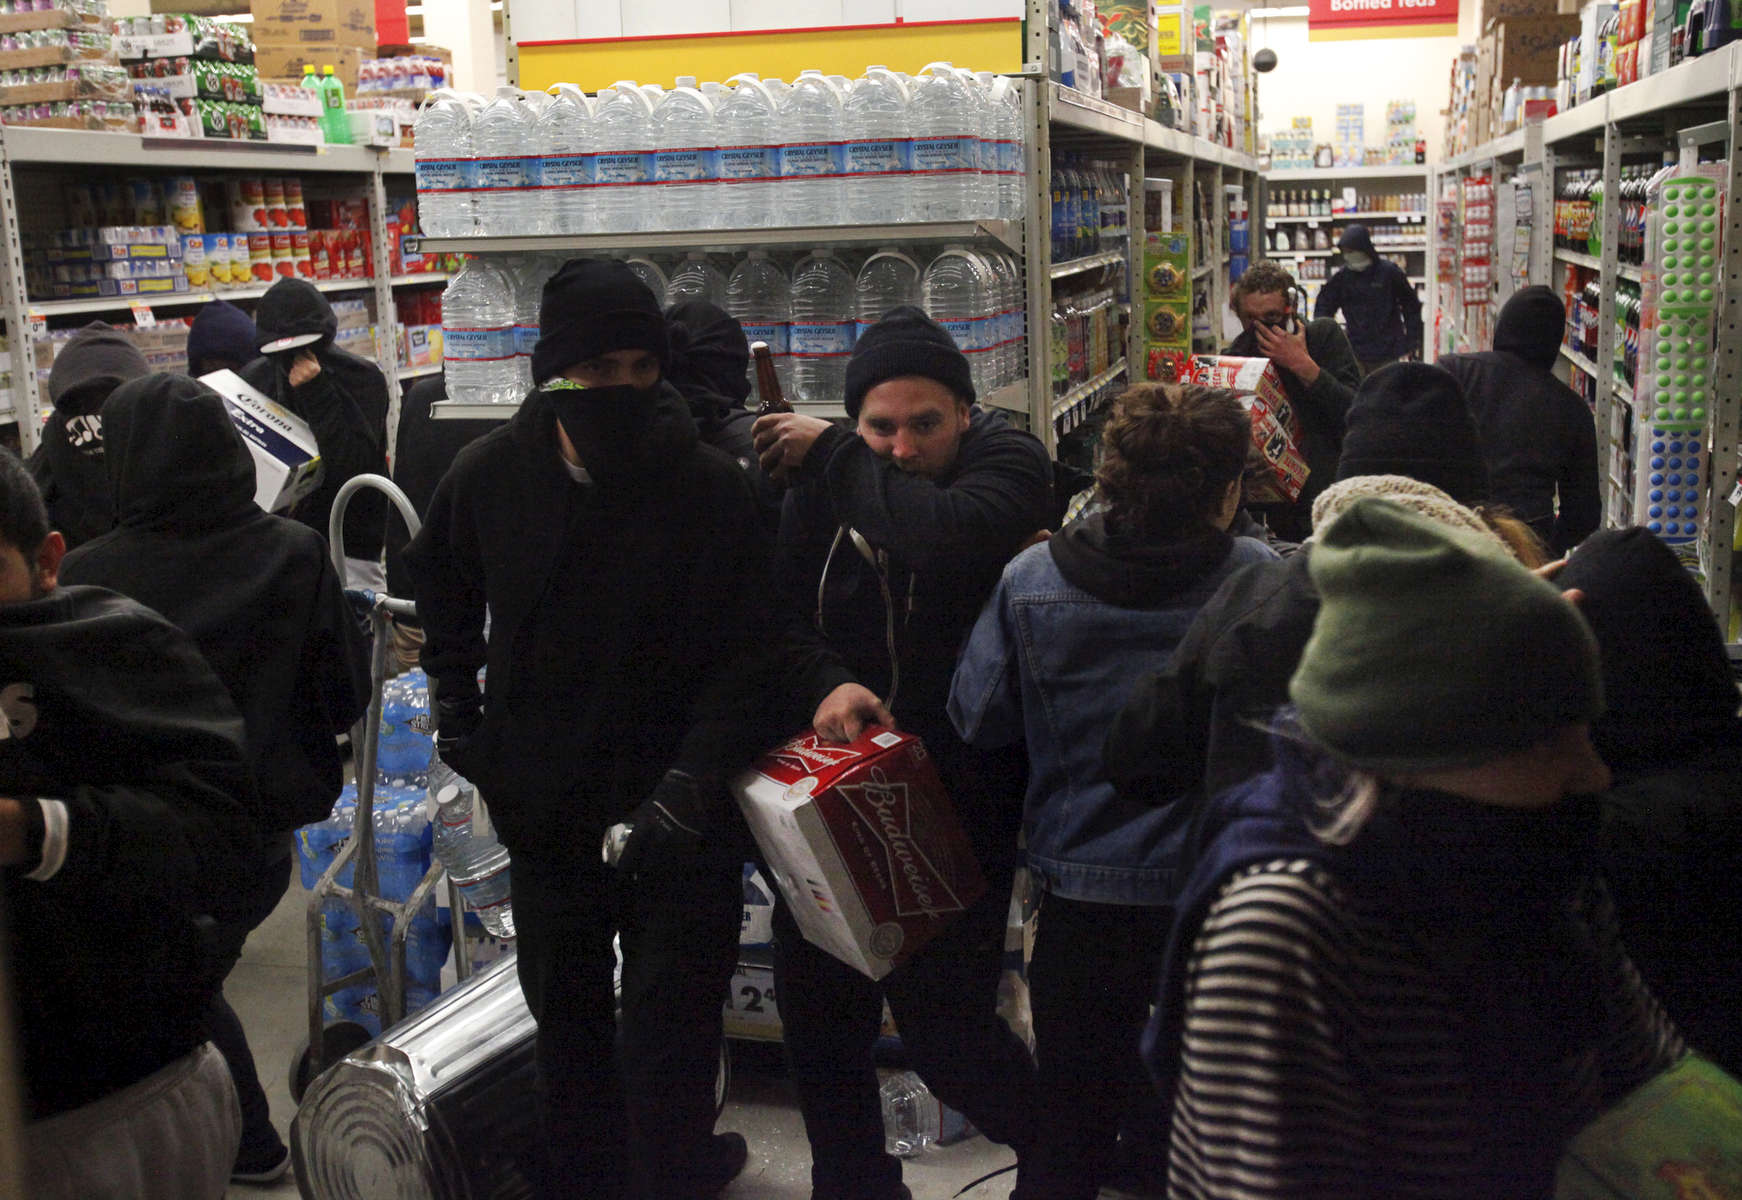 Protesters loot the grocery store Smart and Final after some vandalized the front and broke the windows during a protest against the grand jury's decision not to indict the white police officer who fatally shot an unarmed black teenager months ago in Ferguson Nov. 24, 2014 in Oakland, Calif.